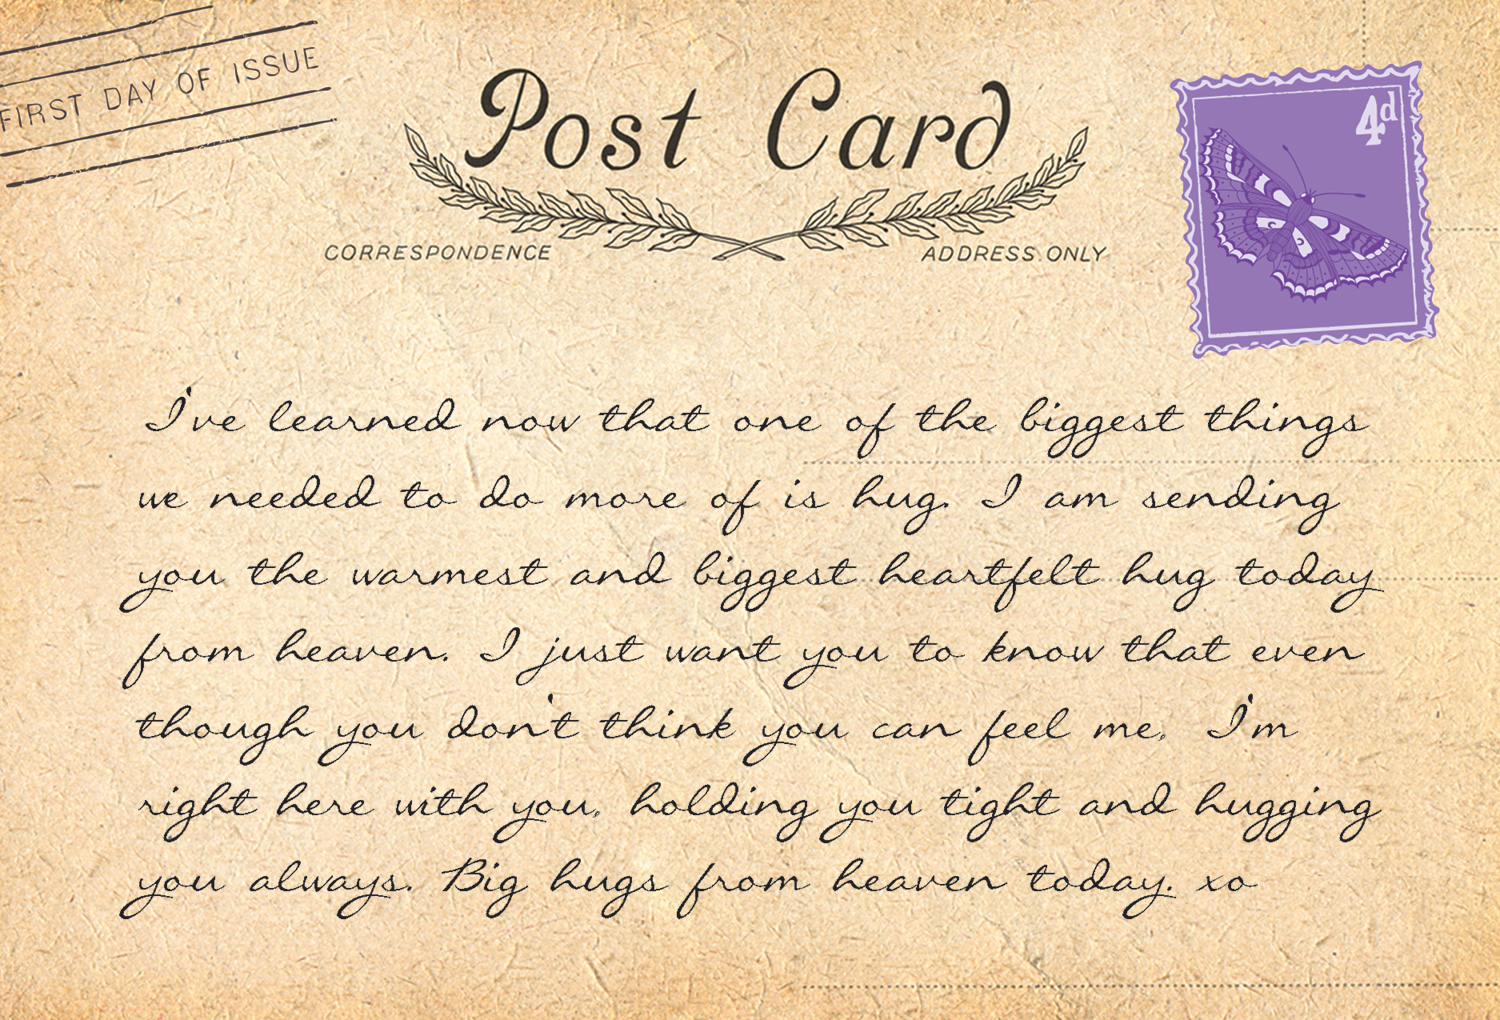 POSTCARDS FROM HEAVEN 2 - back 1